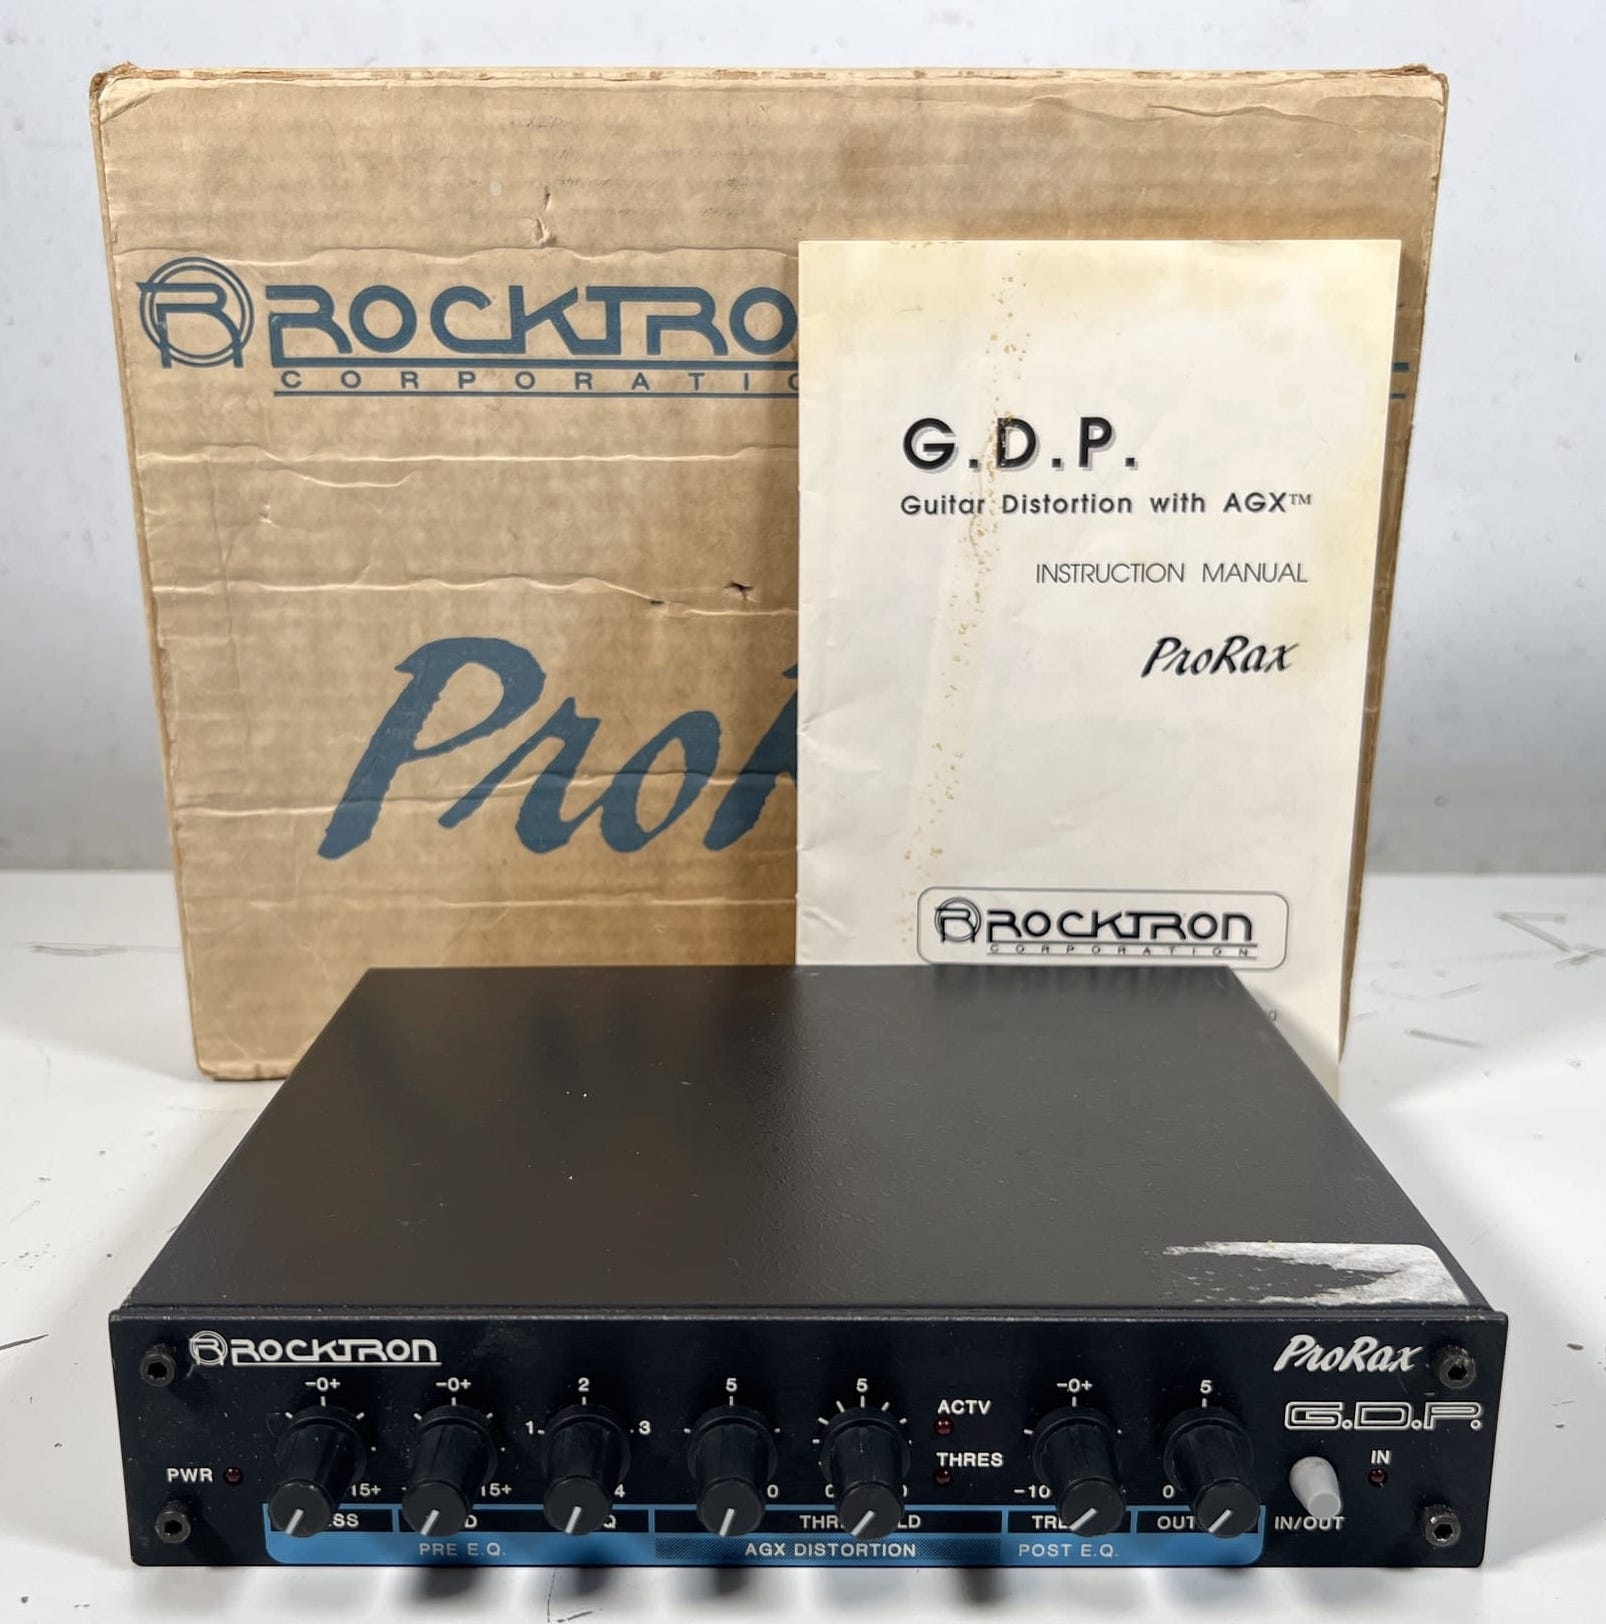 Rocktron ProRax G.D.P. Guitar Distortion Preamp Rack-mounted guitar preamp  designed for creating ri